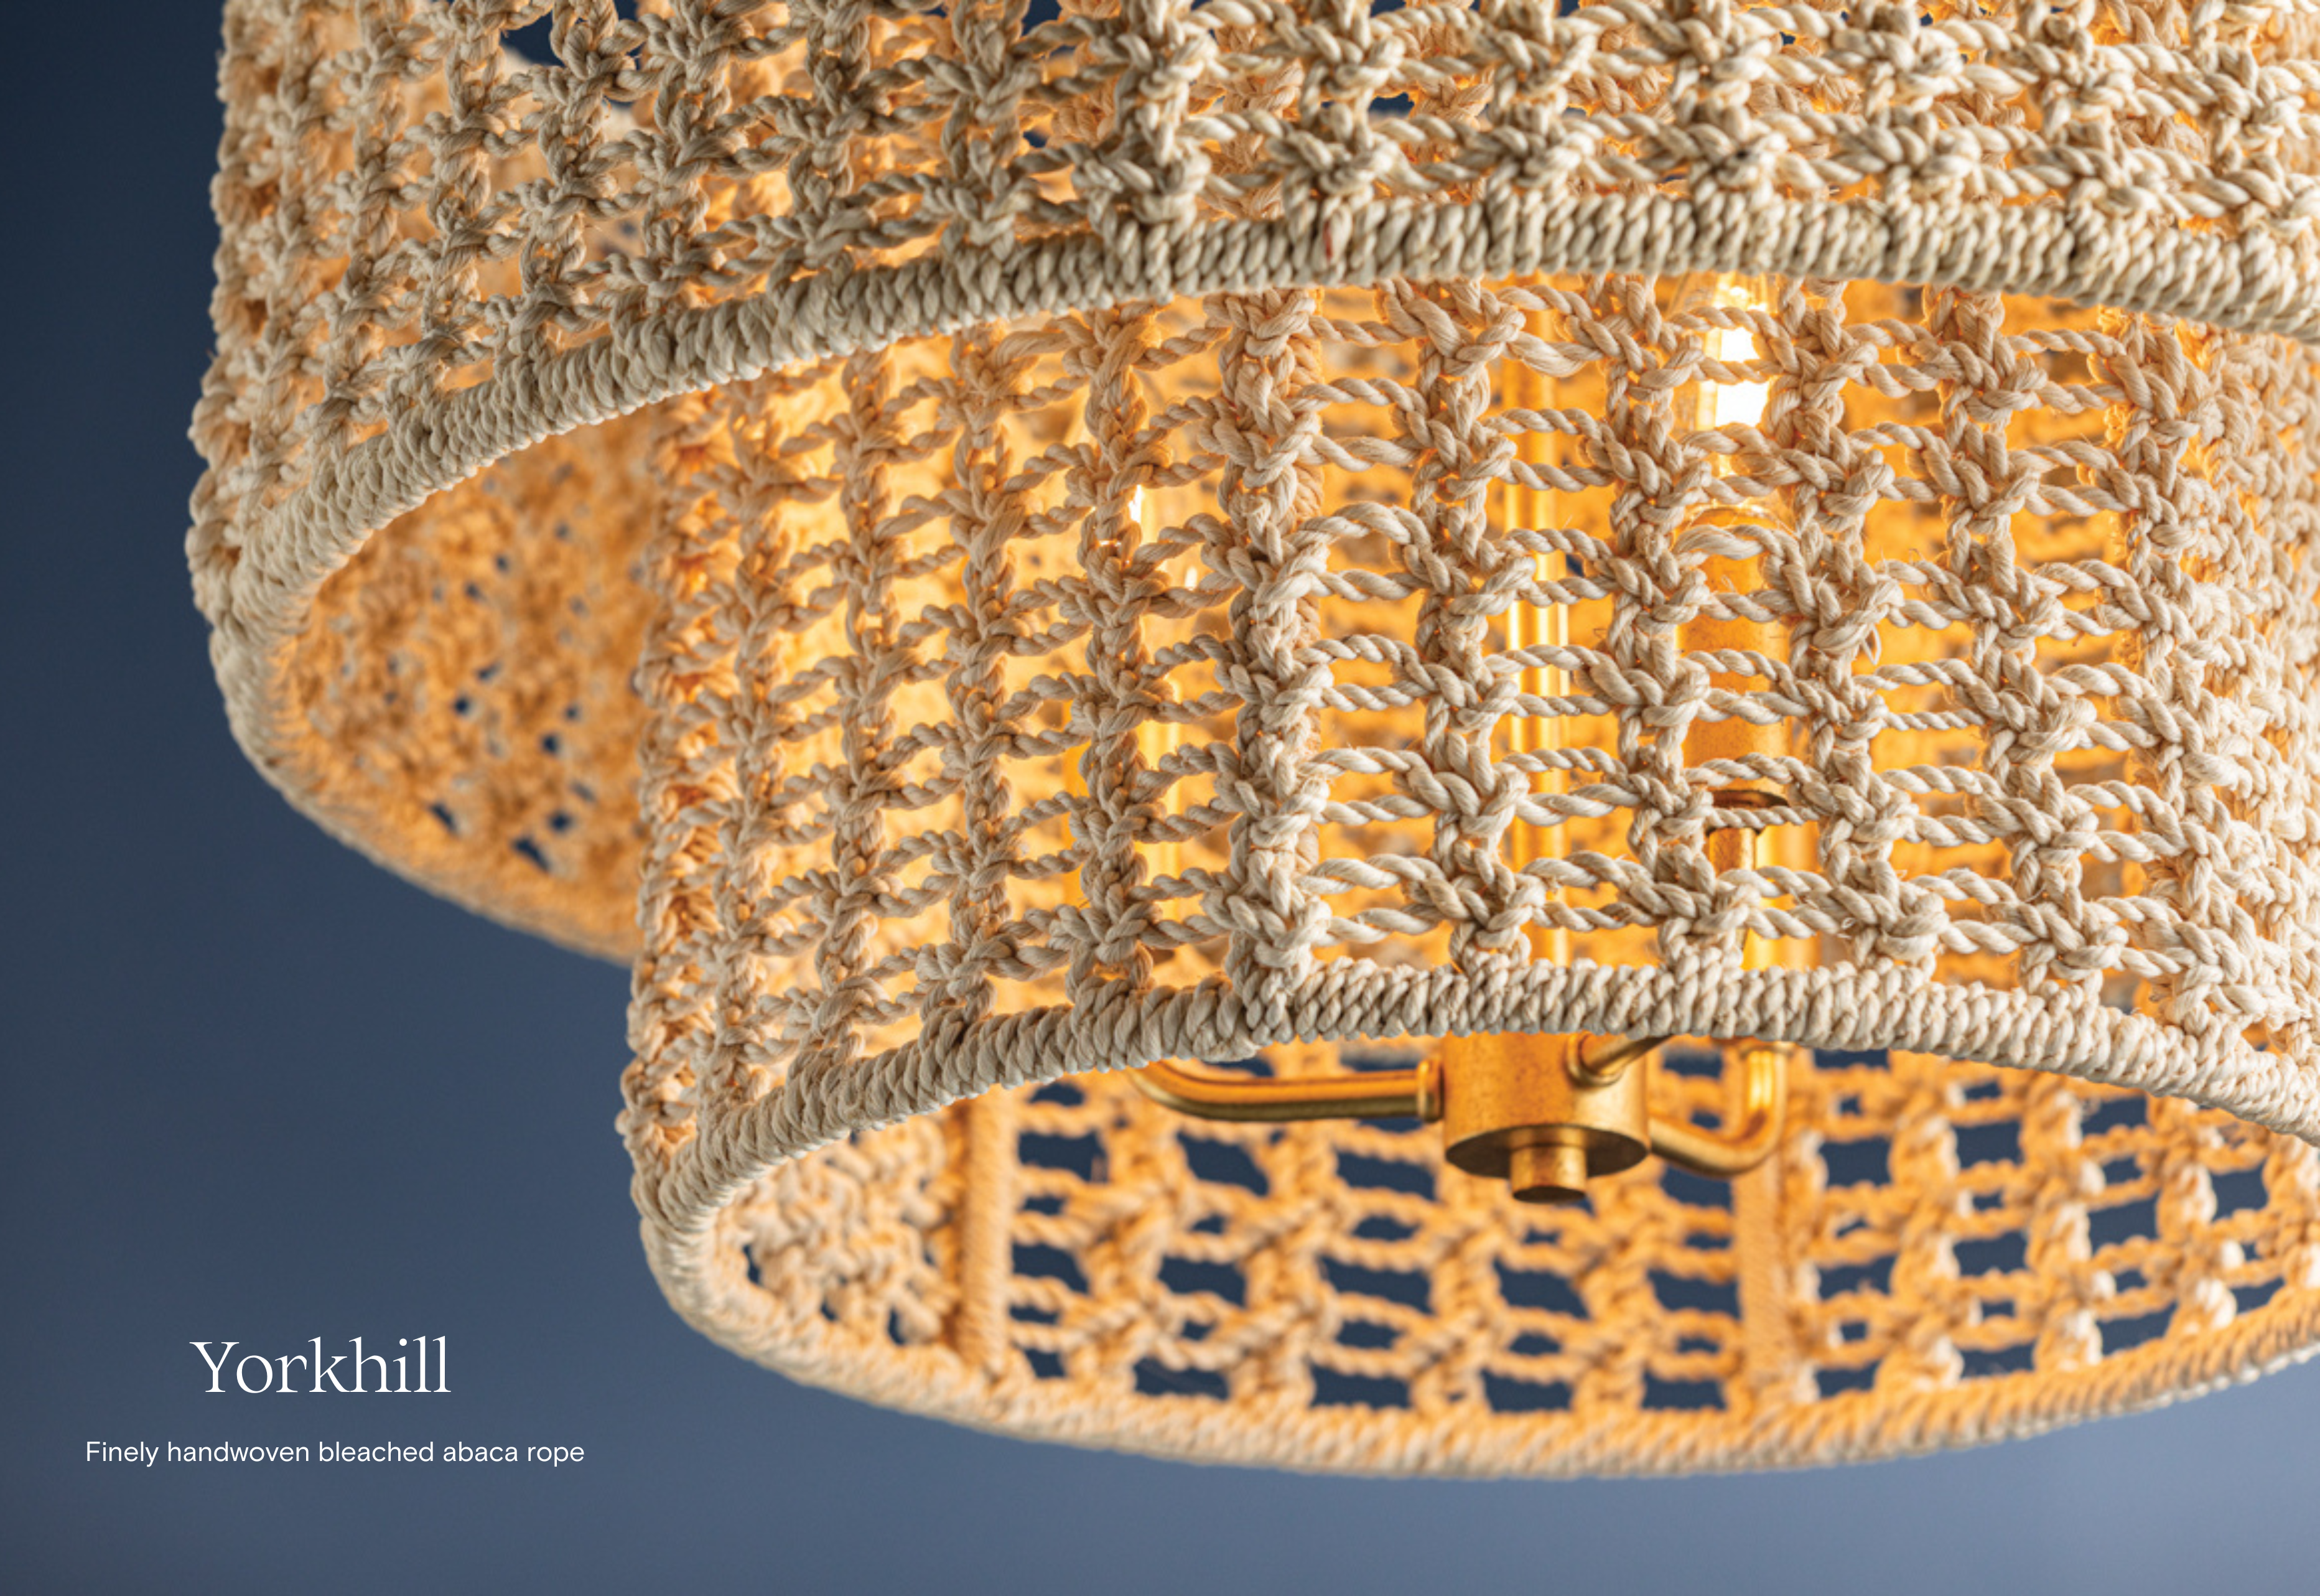 Finely handwoven from bleached abaca rope, the Yorkhill by Hudson Vallet Lighting channels bohemian style with its macramé-like design